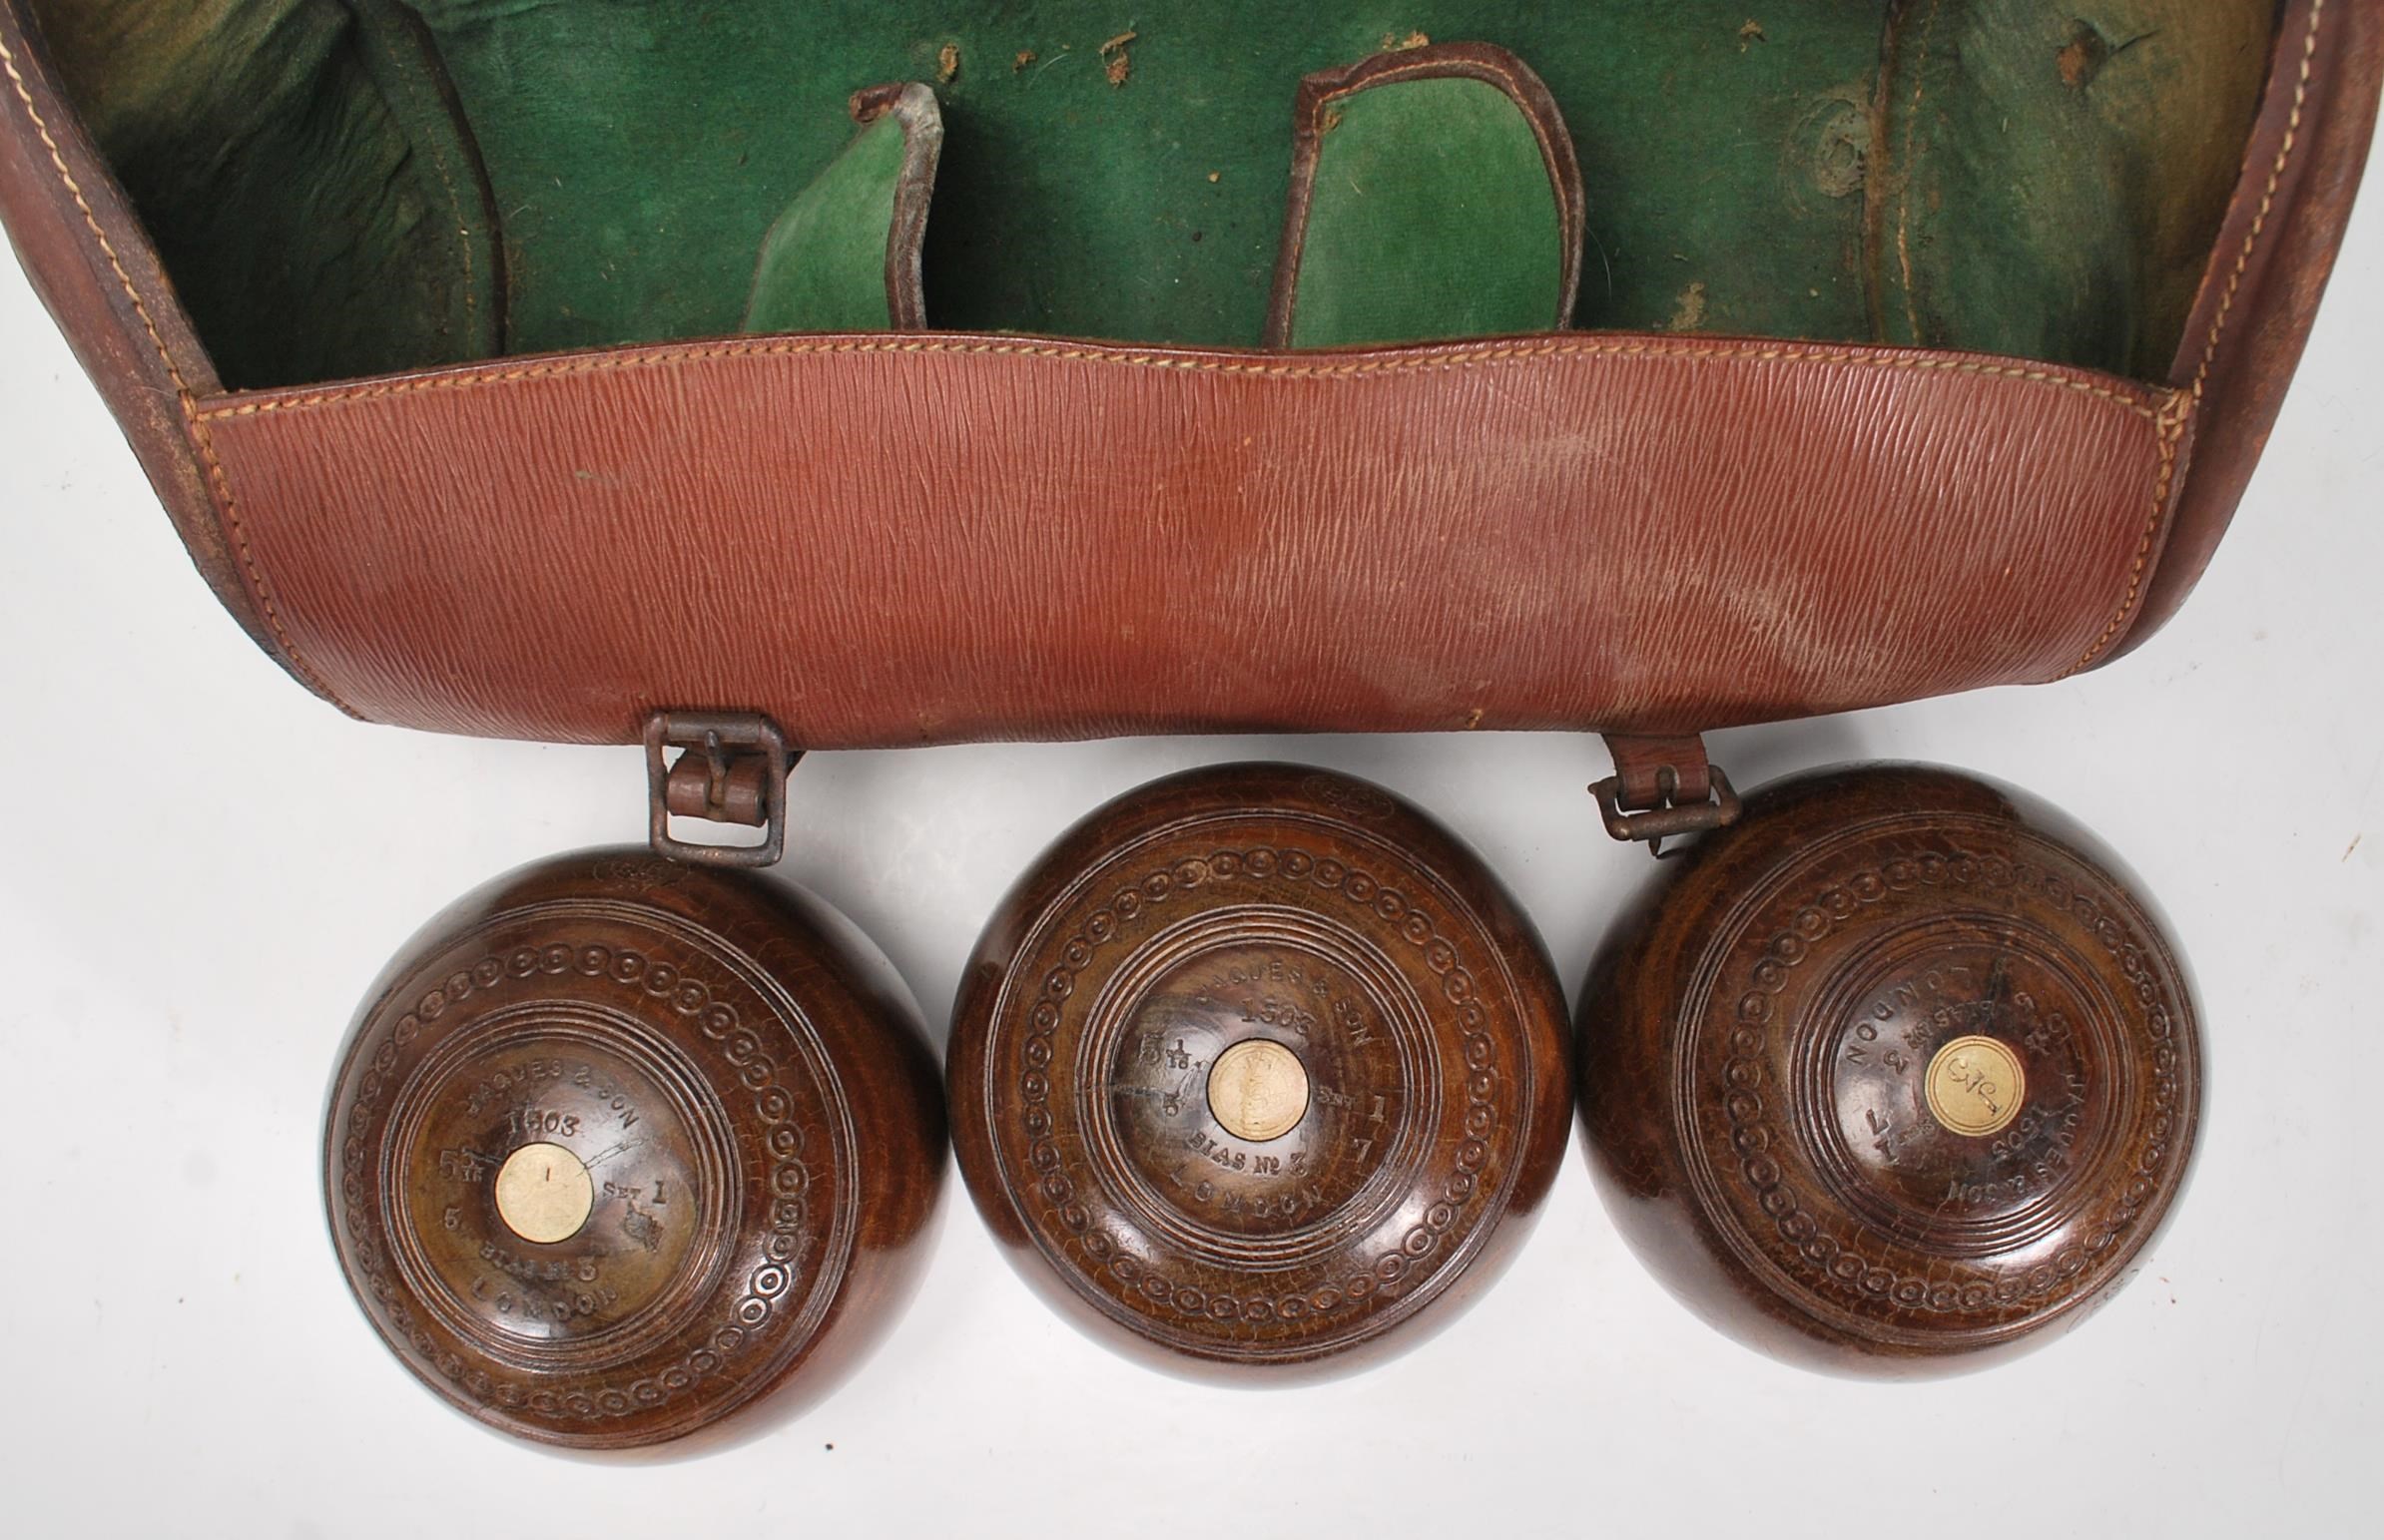 Crown Green Bowls - A set of three early 20th century vintage lignum vitae bowling bowls, in - Image 3 of 6